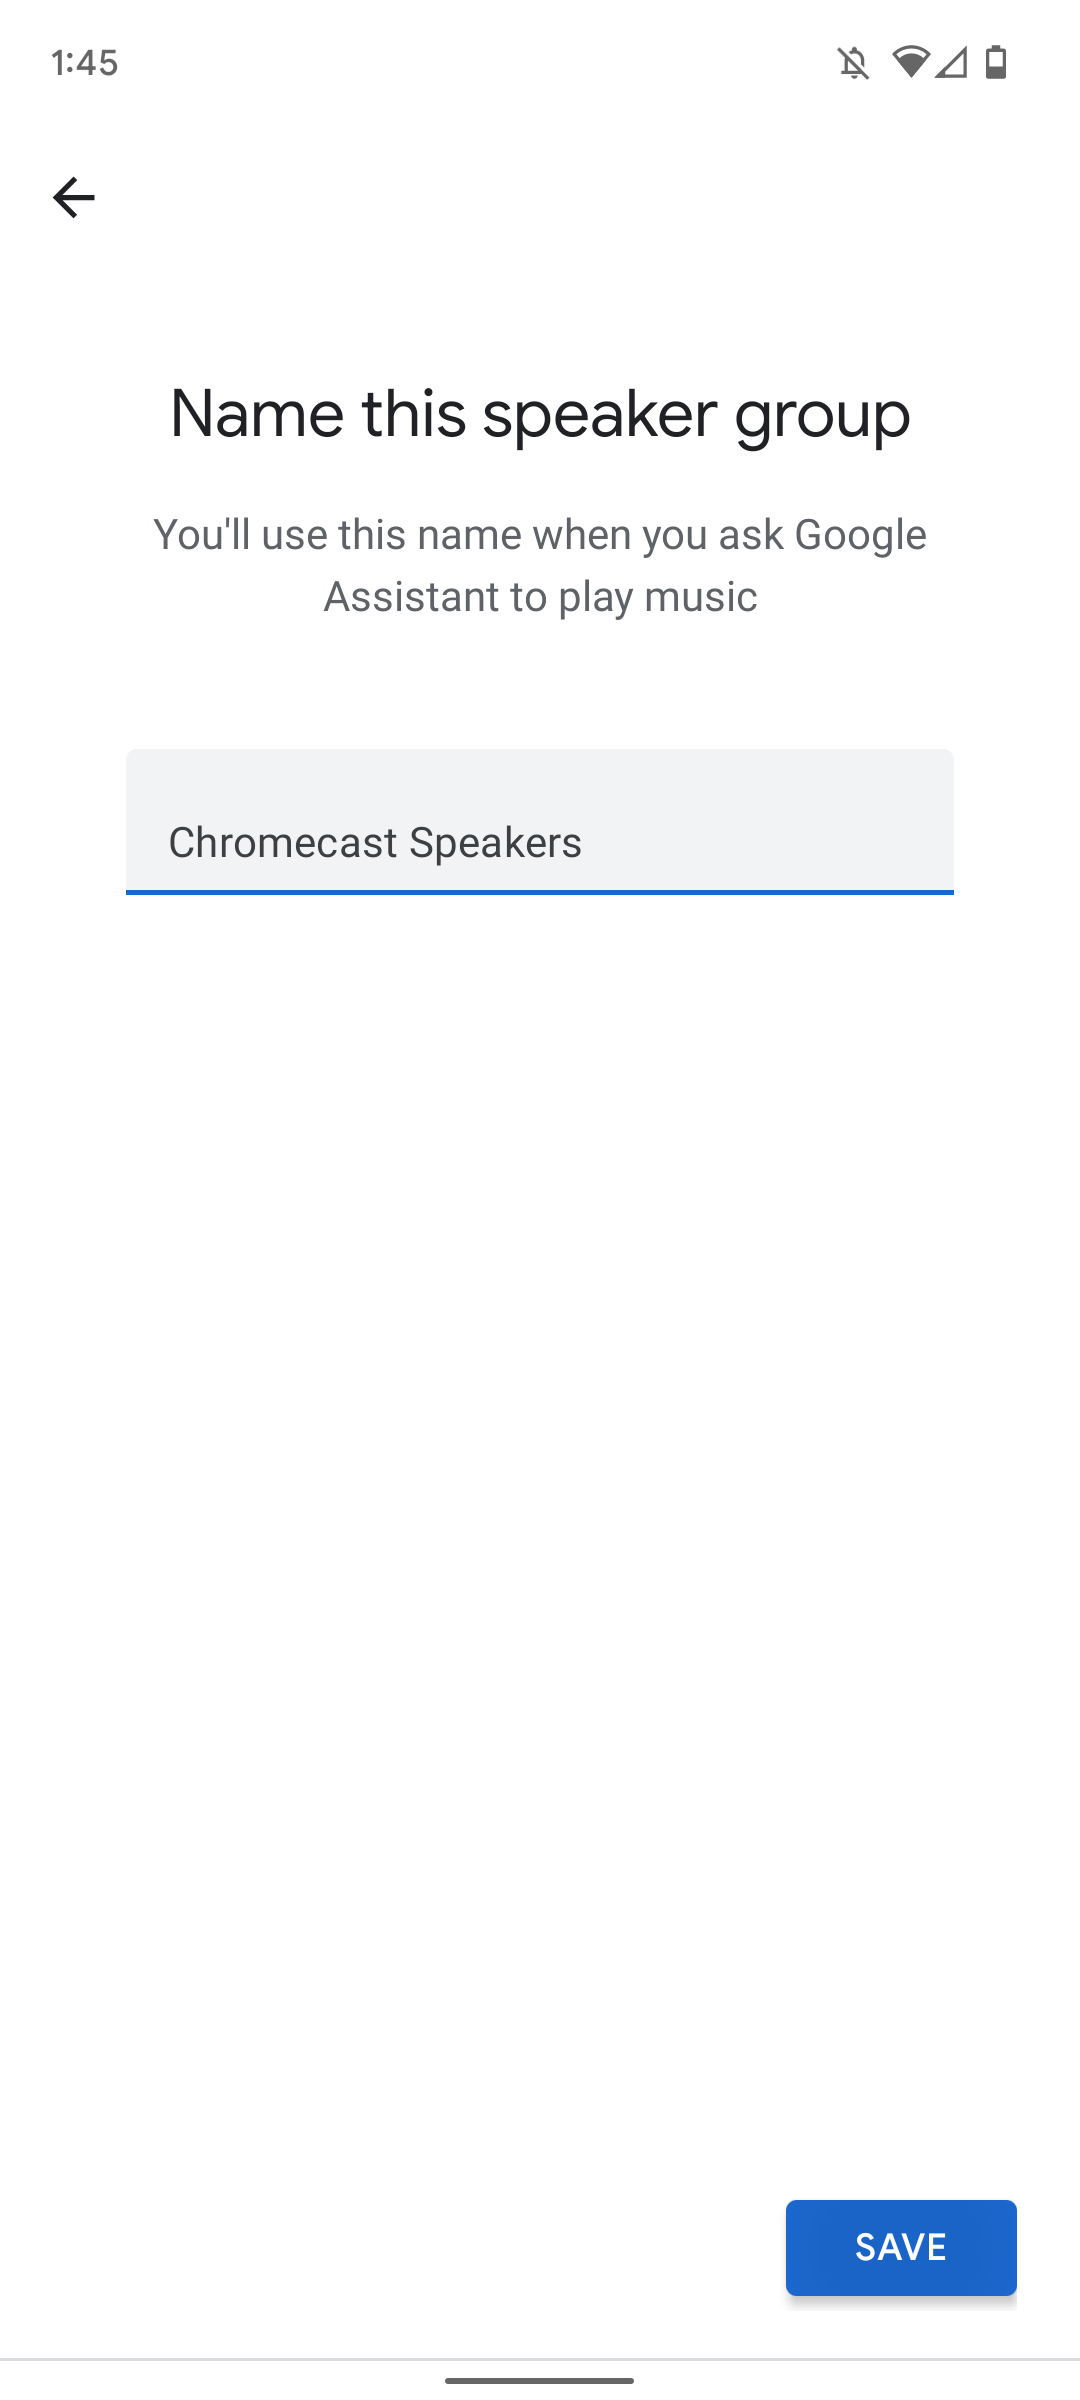 google home app screenshot showing field for entering a group name